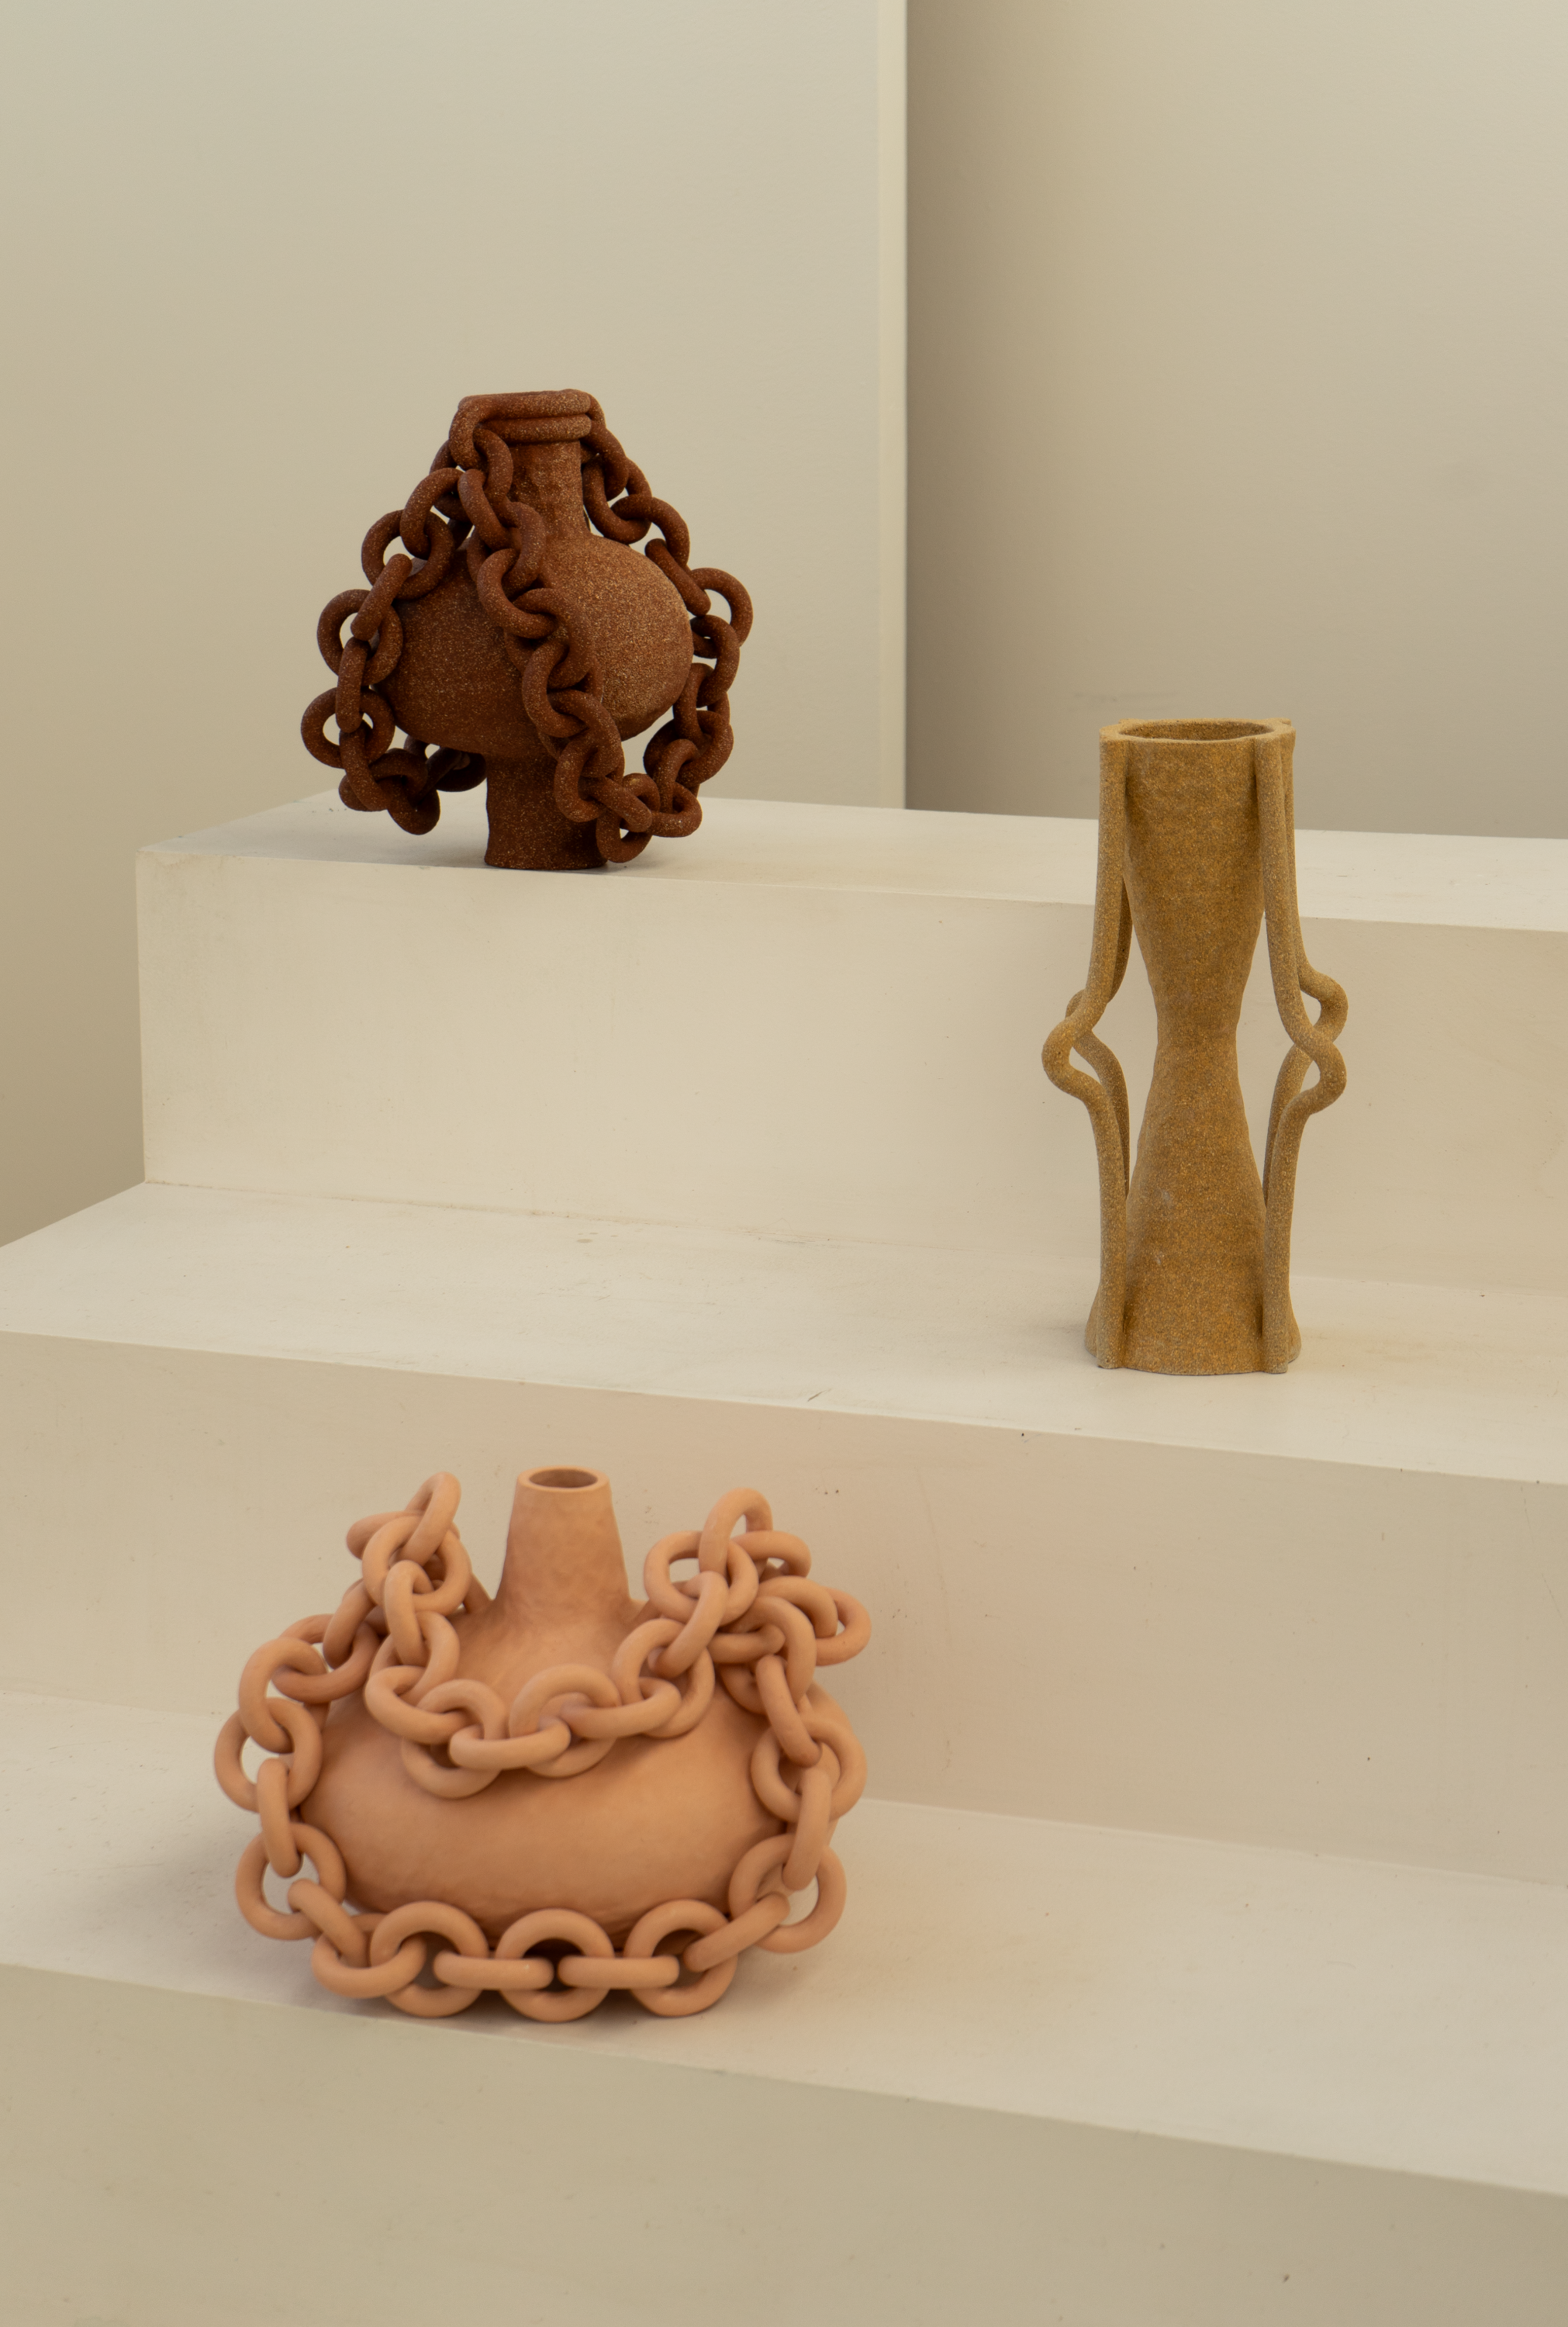 Three 2024 ceramic chained vessels by Sharpe, 14 x 14 x 14 in. (top), 16 x 10 x 8 in. (middle), 16 x 16 x 16 in. (bottom). Photo by Whitney Sharpe.